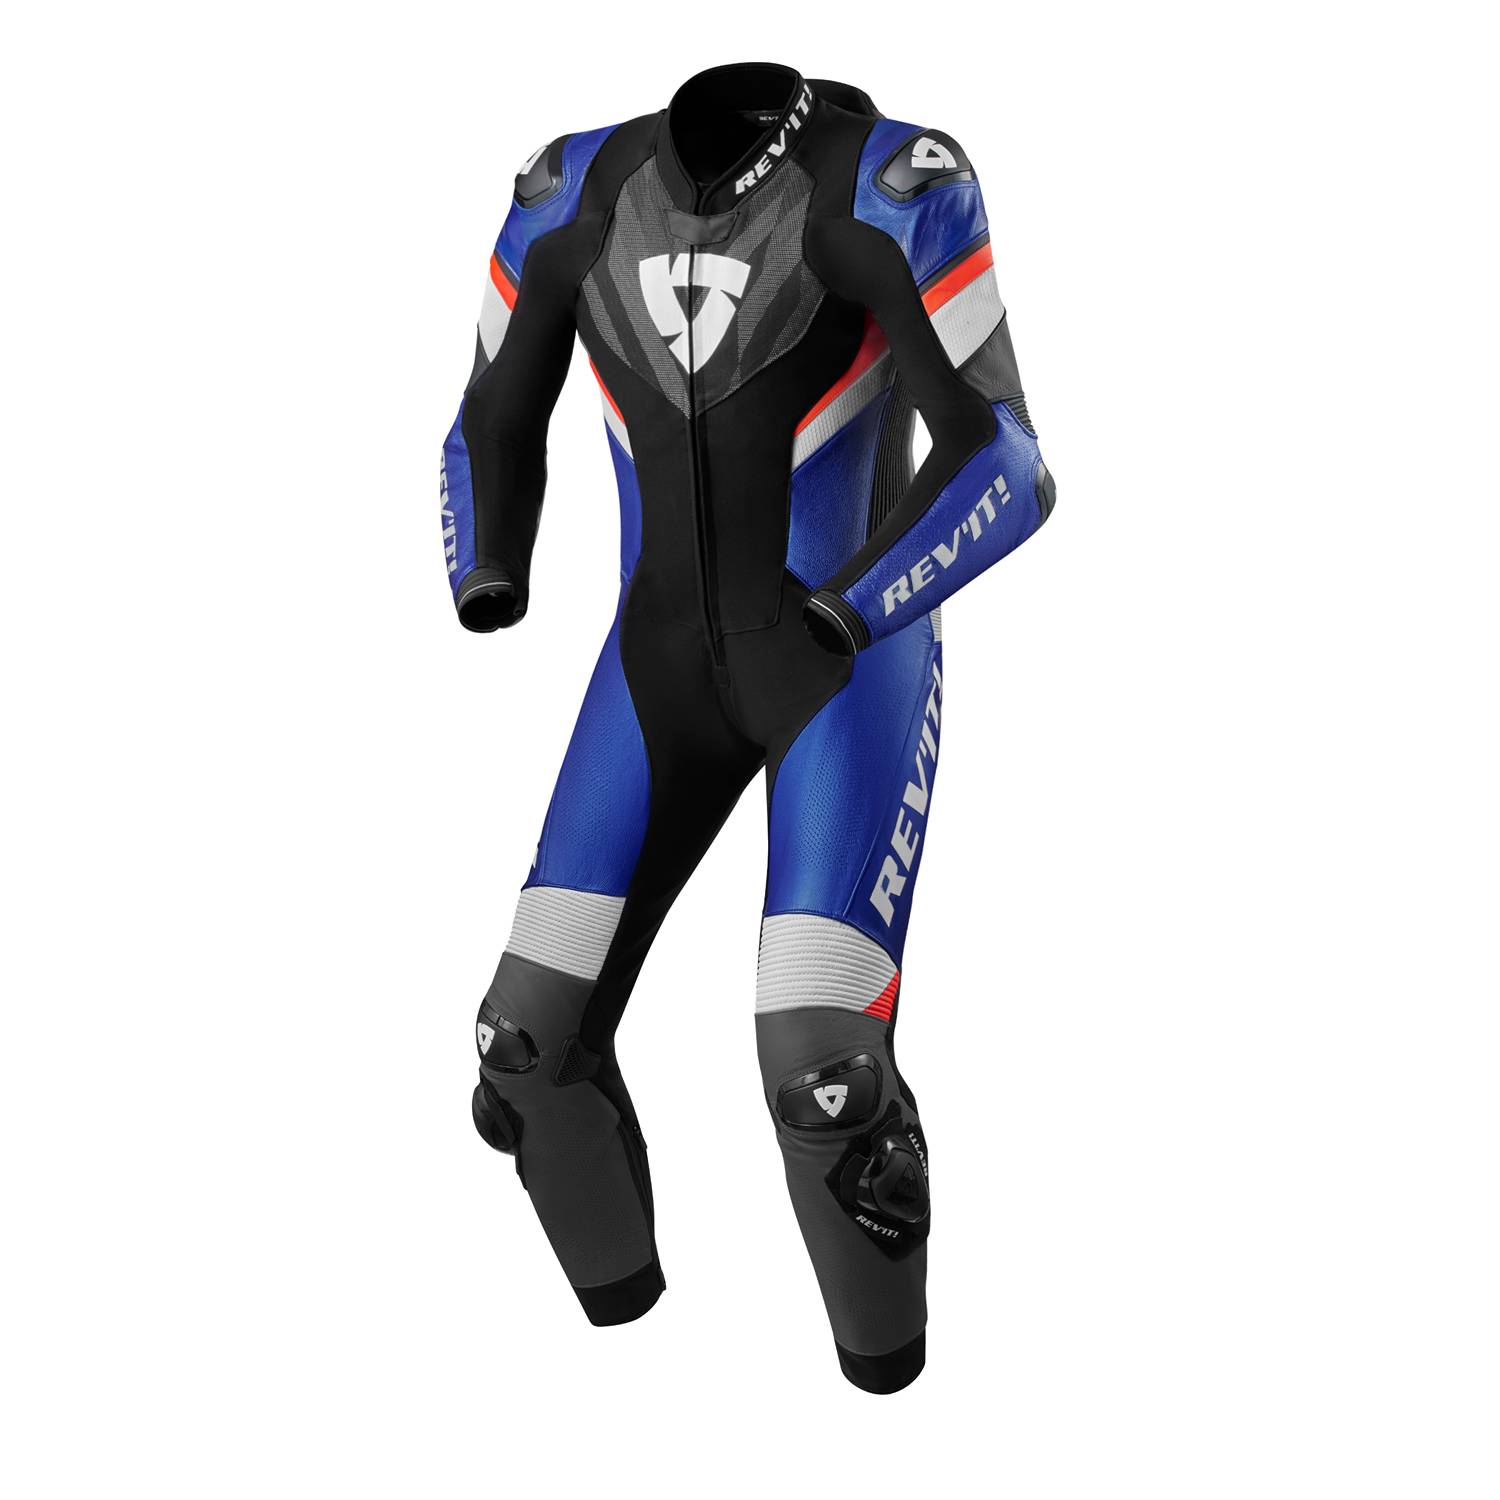 Image of REV'IT! Hyperspeed 2 One Piece Suit Black Blue Size 48 ID 8700001359726